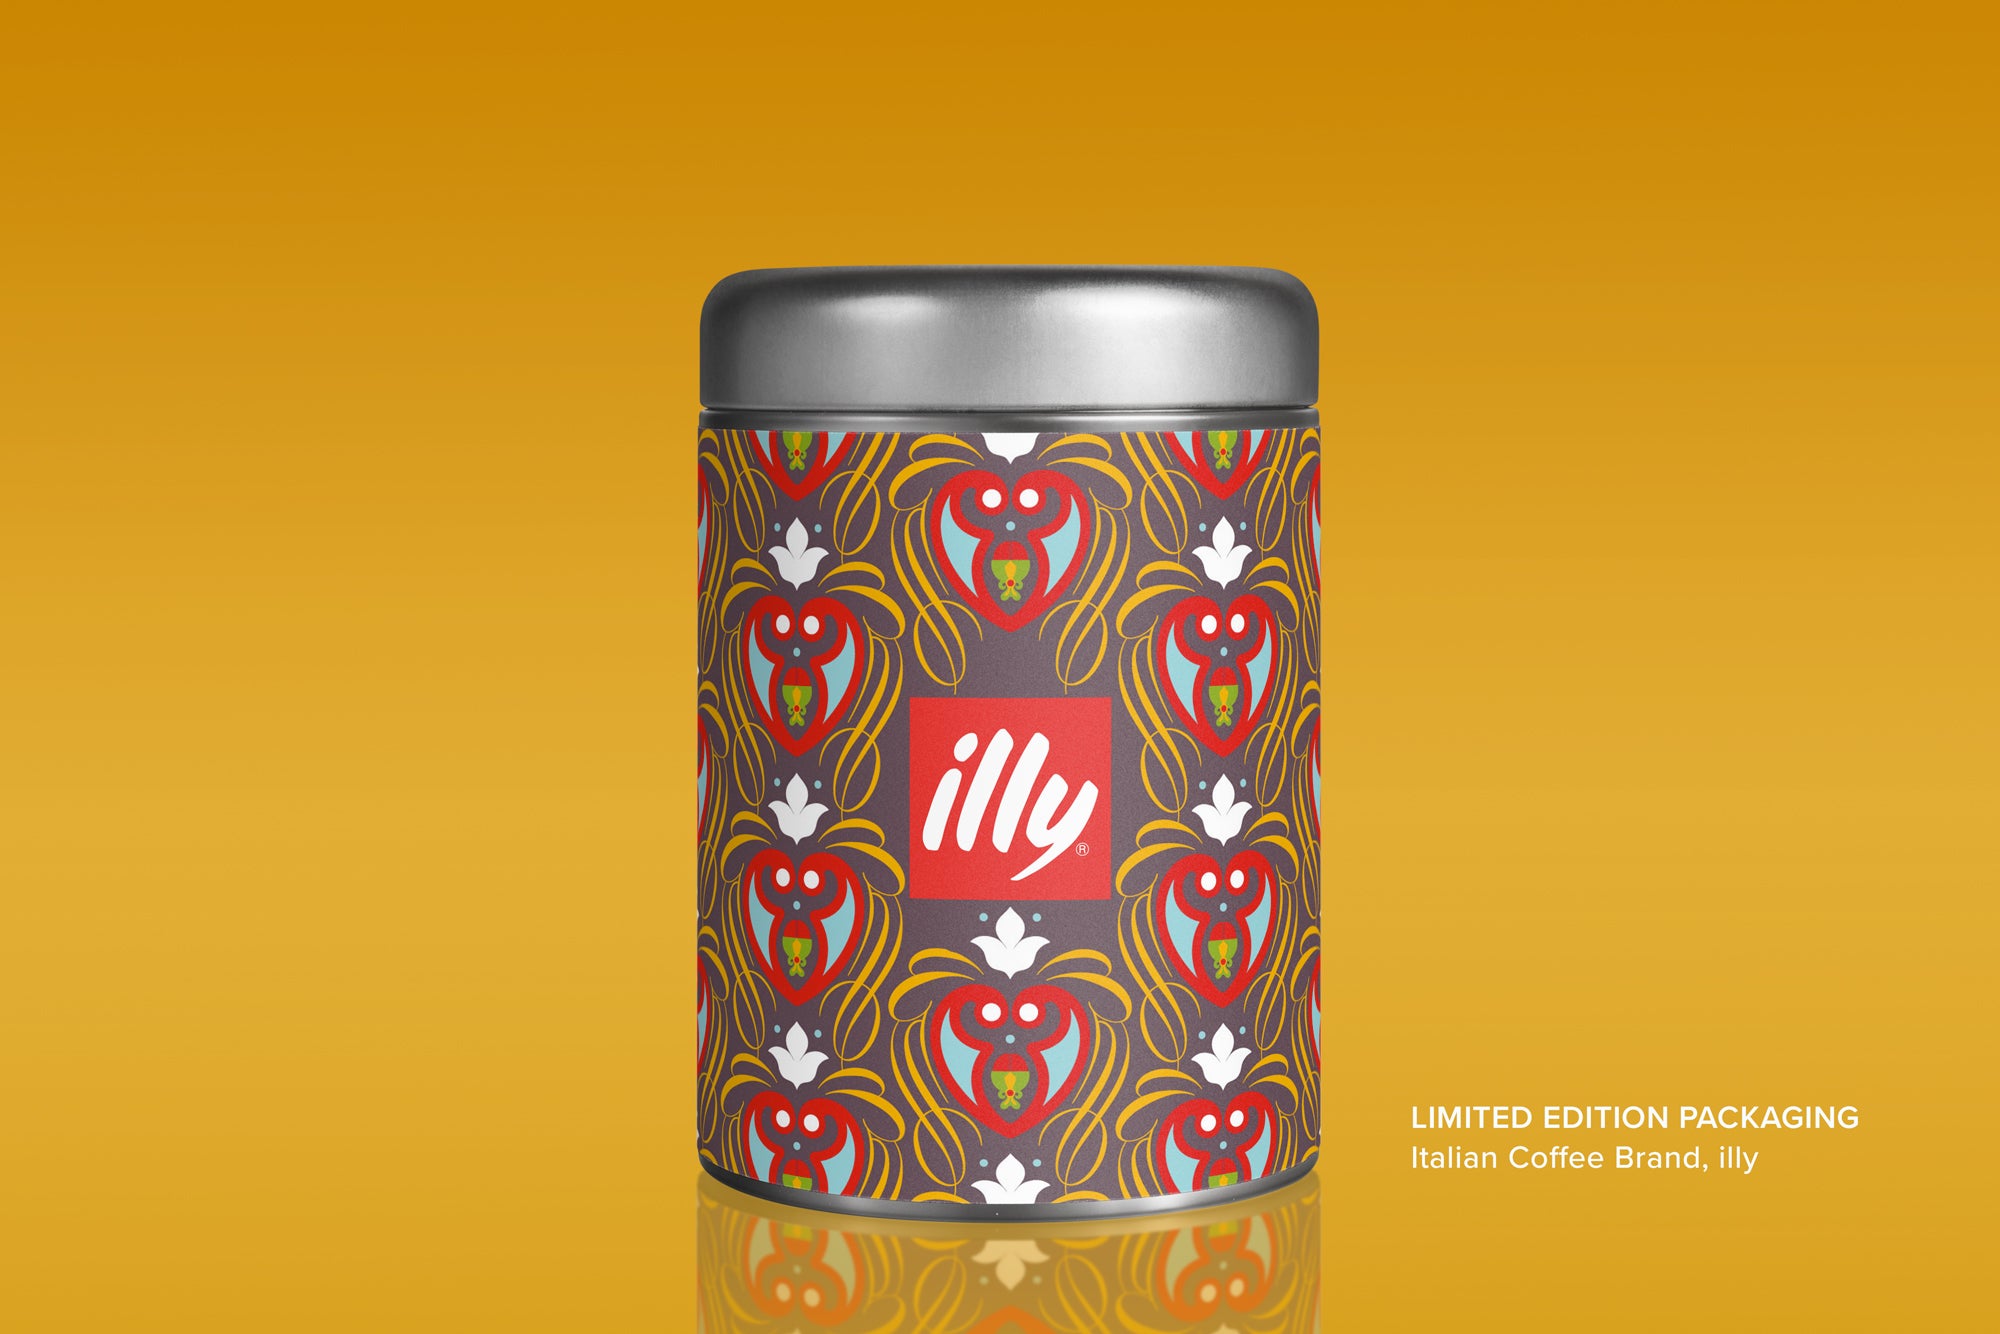 Packaging design for the Italian Coffee brand, Illy